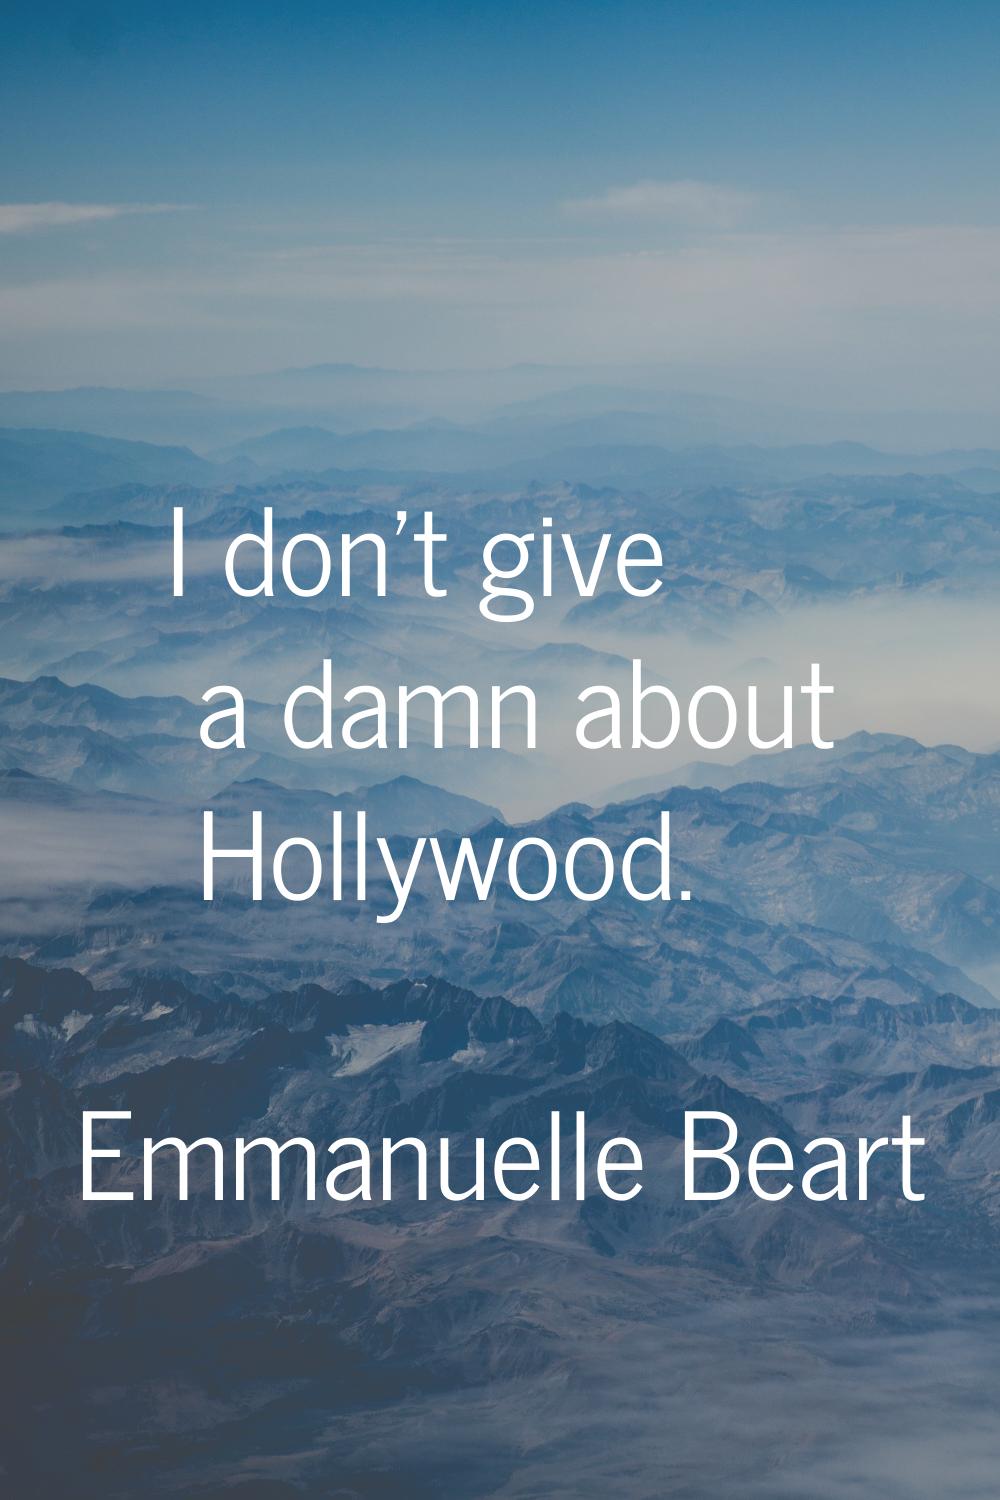 I don't give a damn about Hollywood.